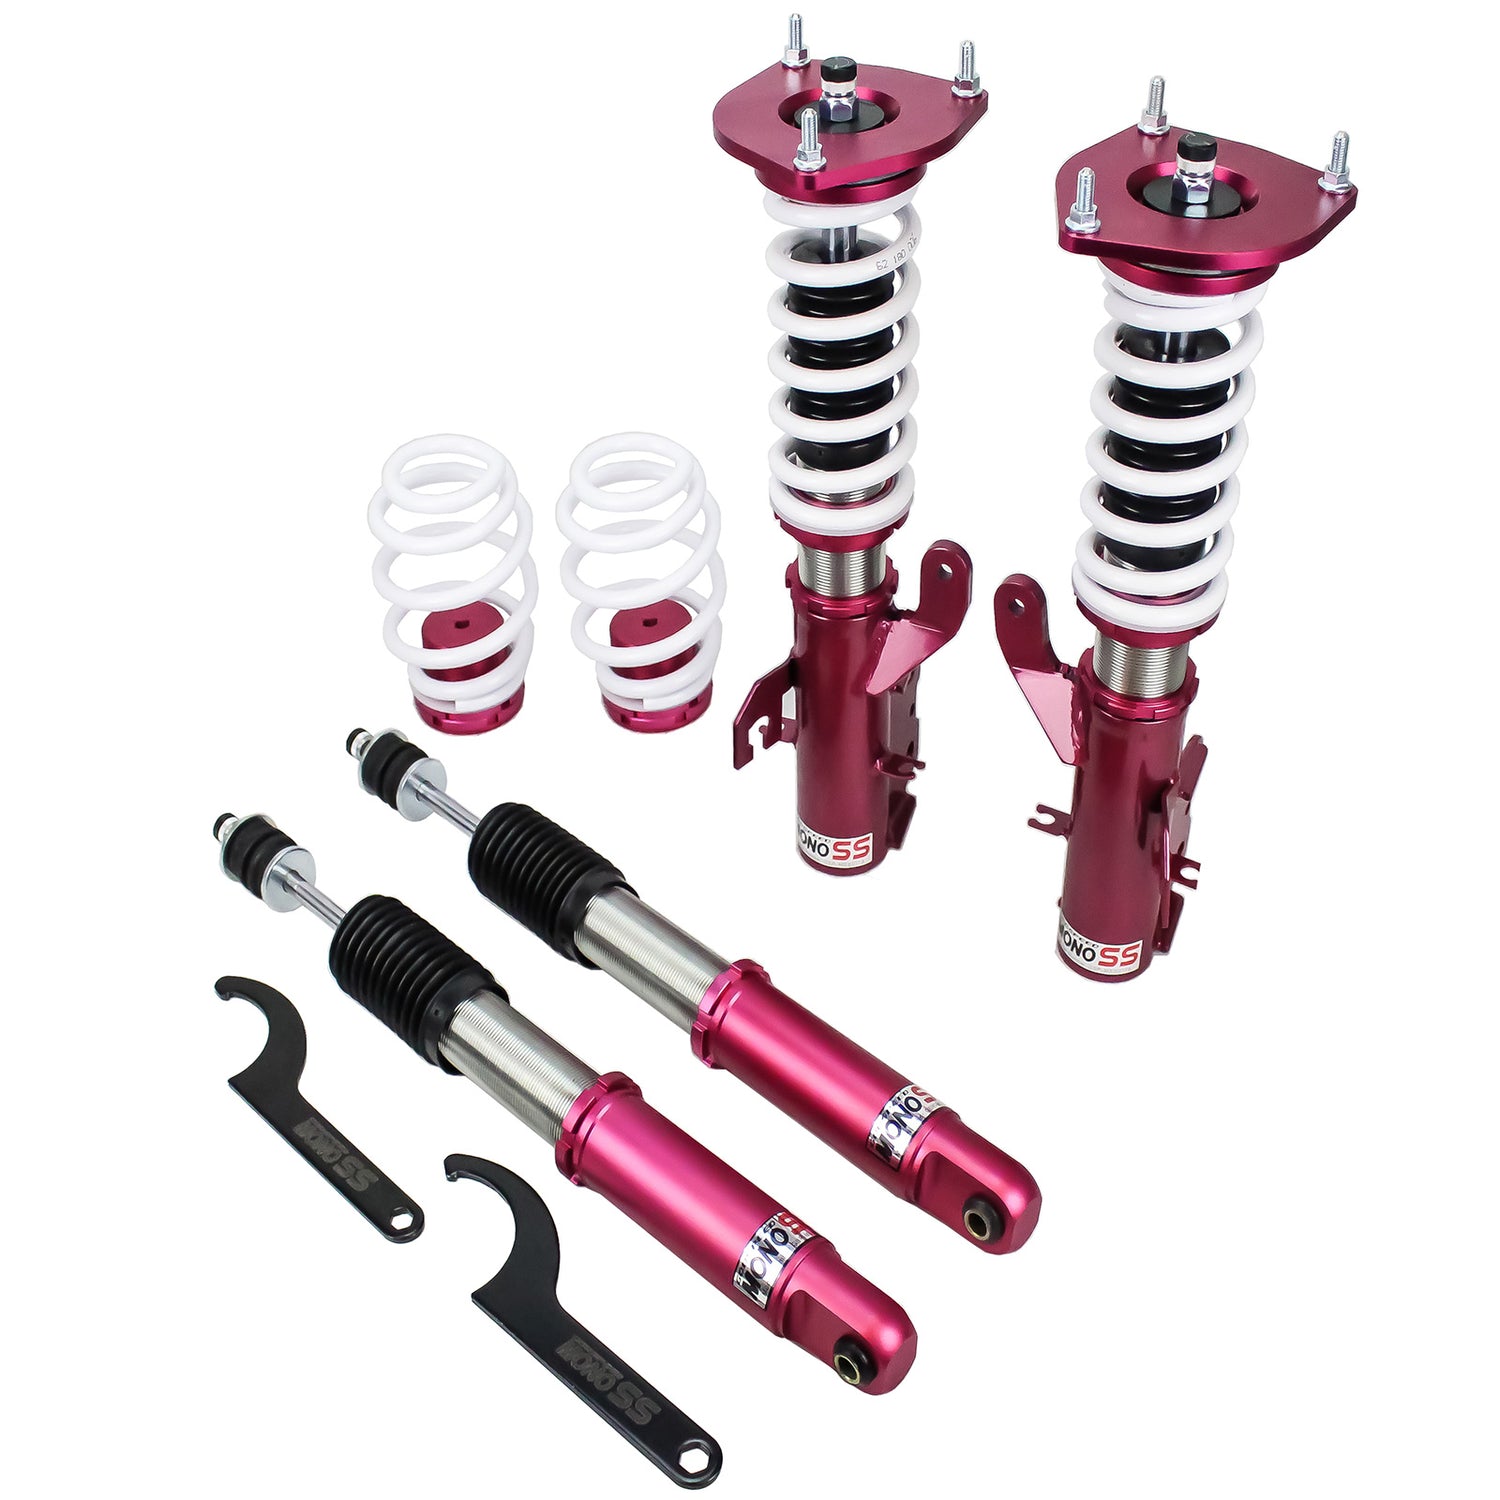 Godspeed MSS0118-A MonoSS Coilover Lowering Kit, Fully Adjustable, Ride Height, Spring Tension And 16 Click Damping, Nissan Versa Sedan(C11) 2006-12